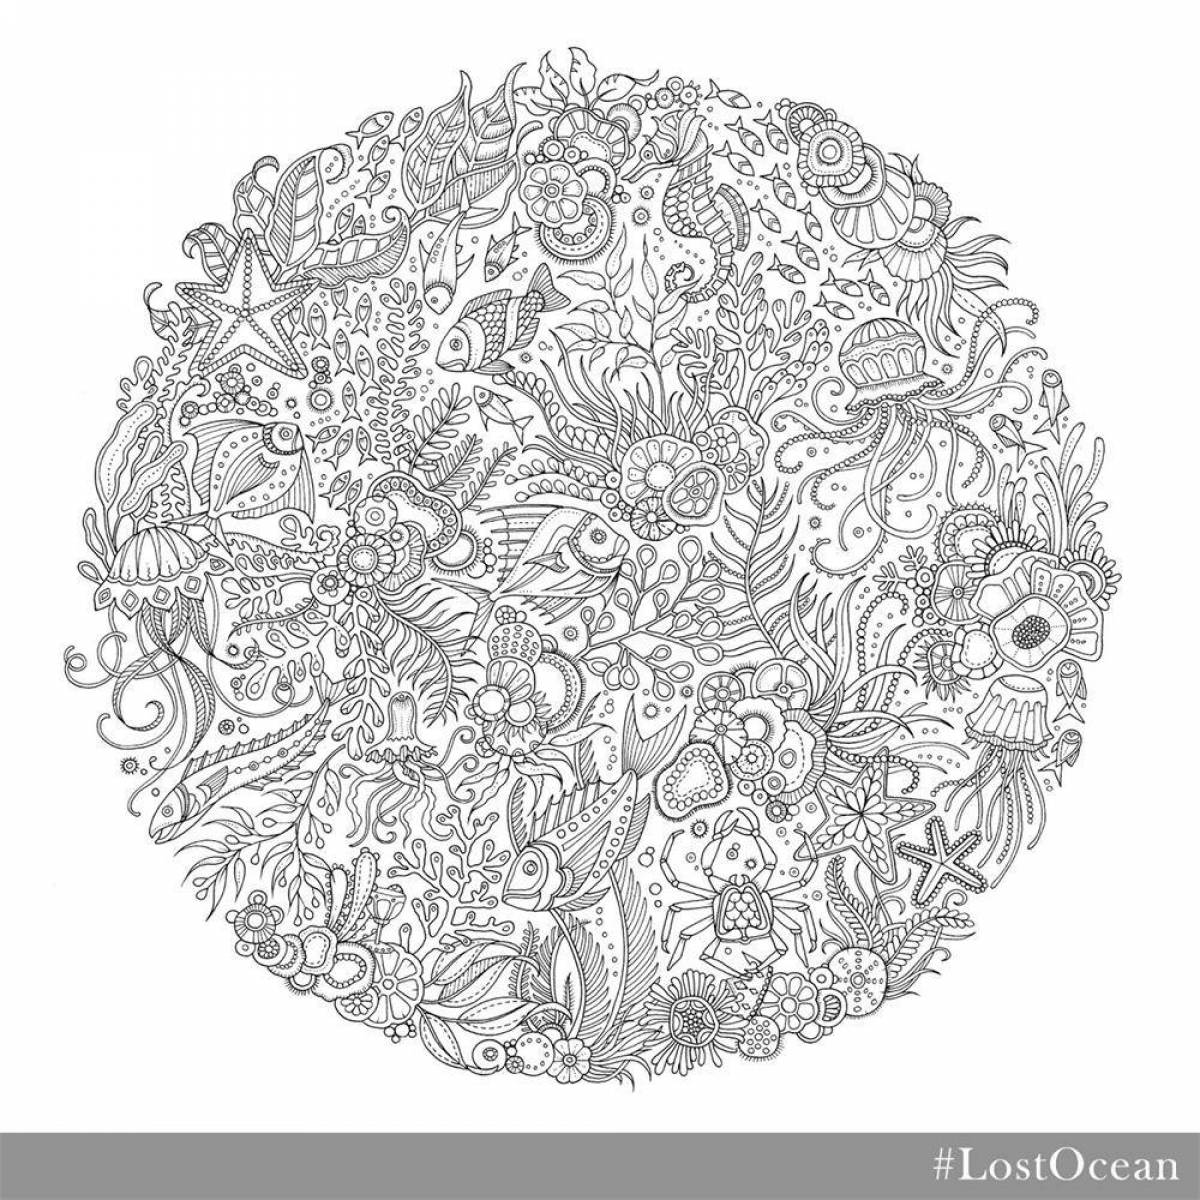 Coloring page of the lost ocean